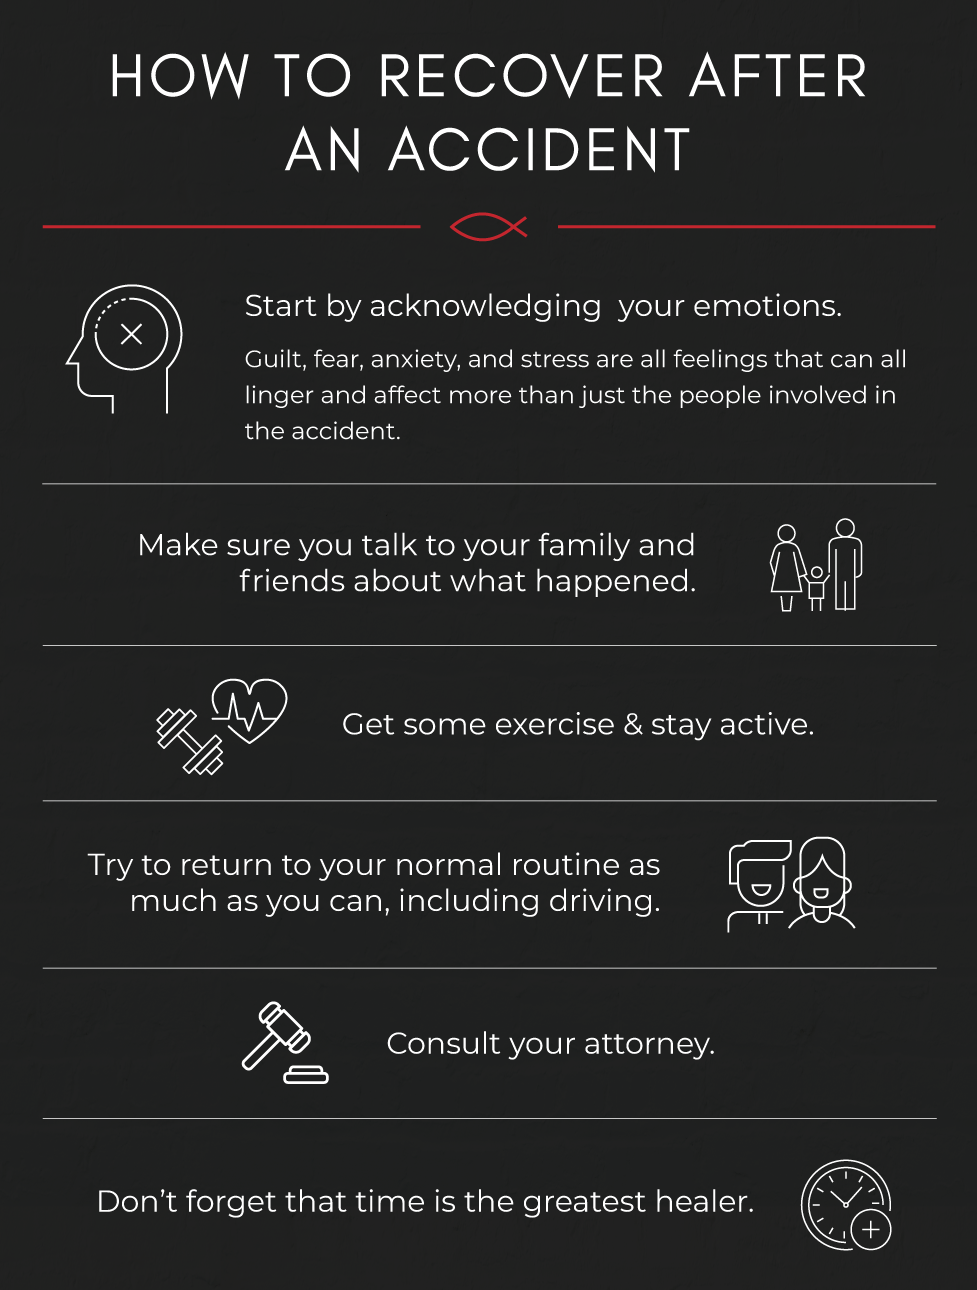 Recovery after an accident infographic